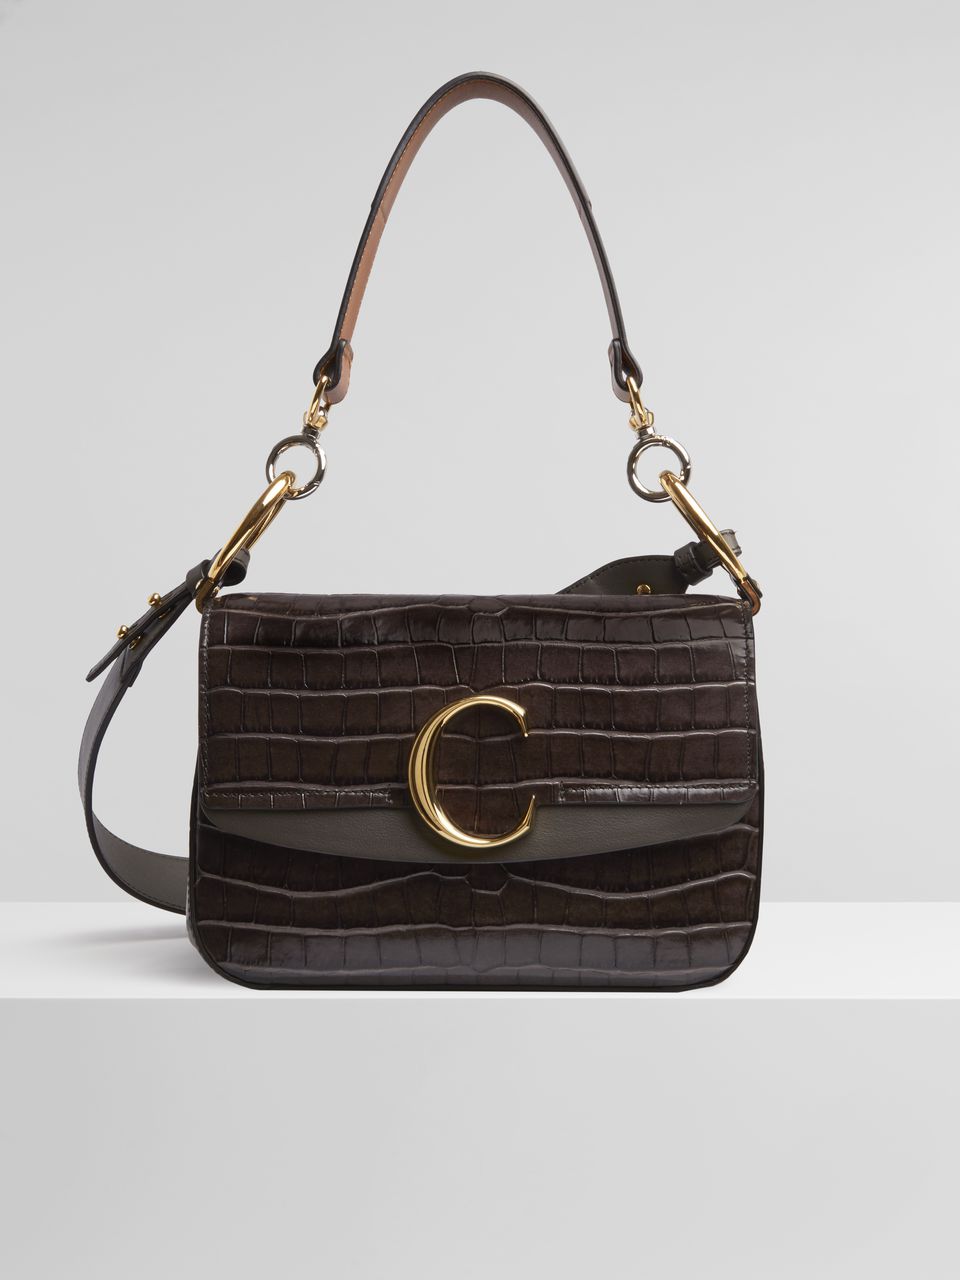 Chloé Celebrates 10 Years of the Marcie Bag With An Anniversary Capsule  Collection - PurseBlog